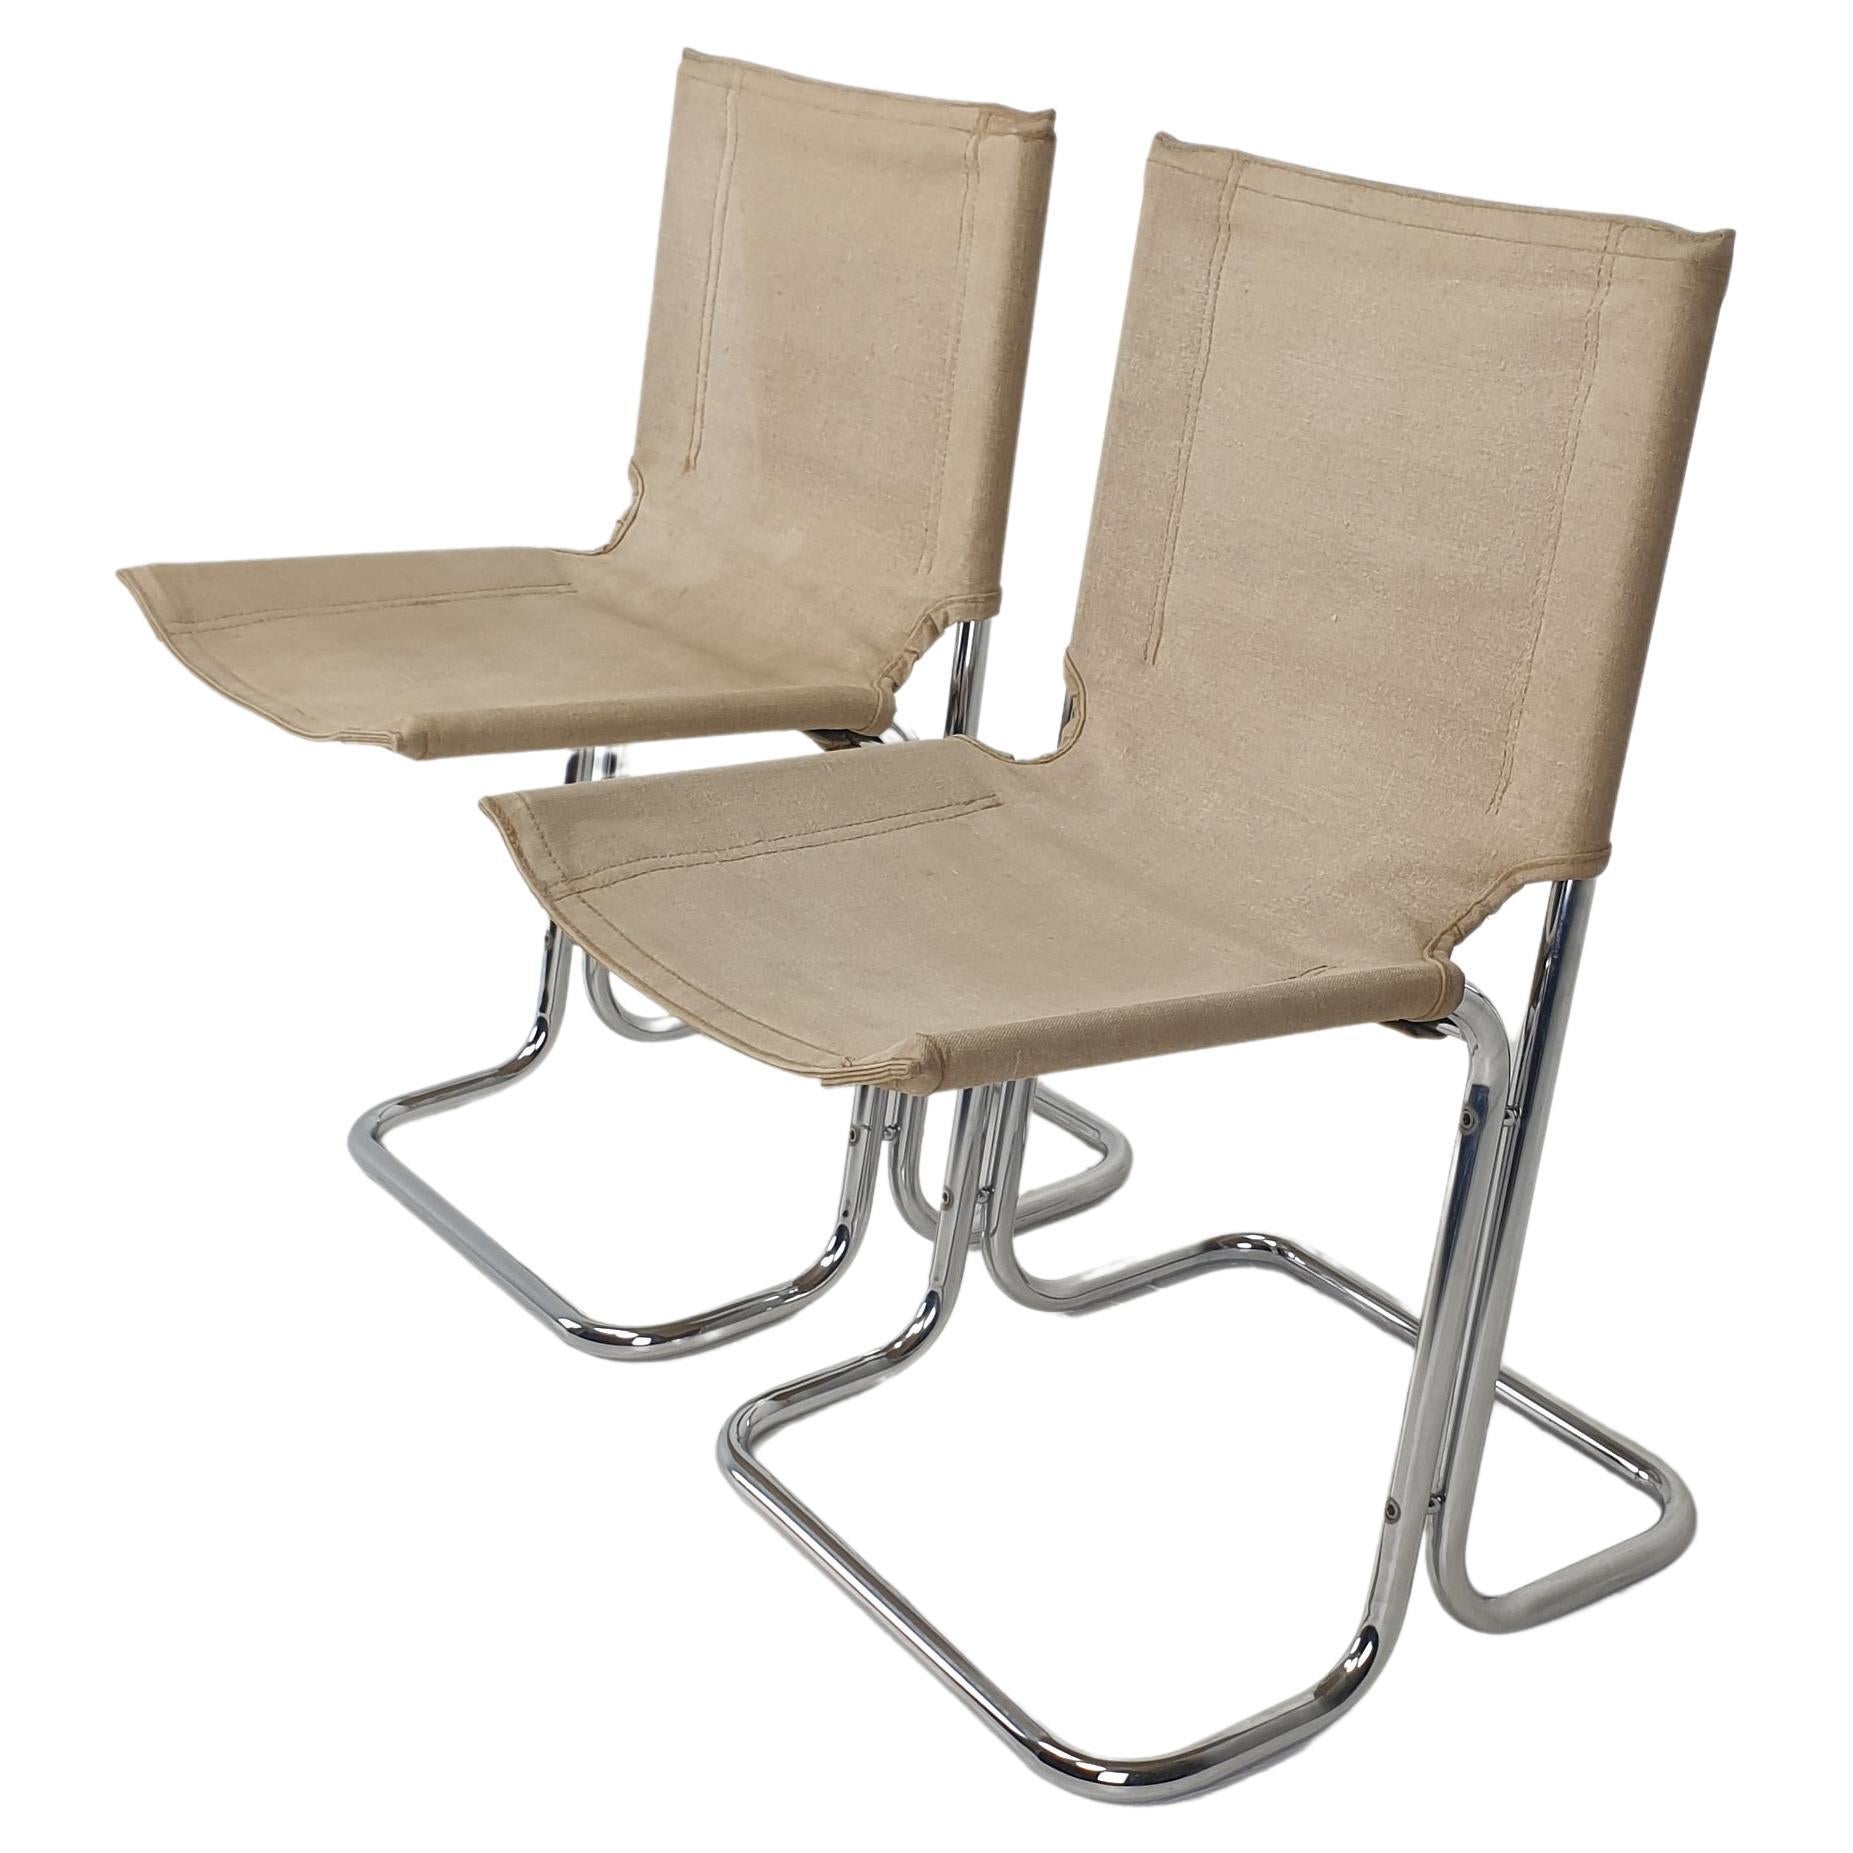 Set of 2 Italian Canvas and Chromed Metal Chairs, 1970's For Sale